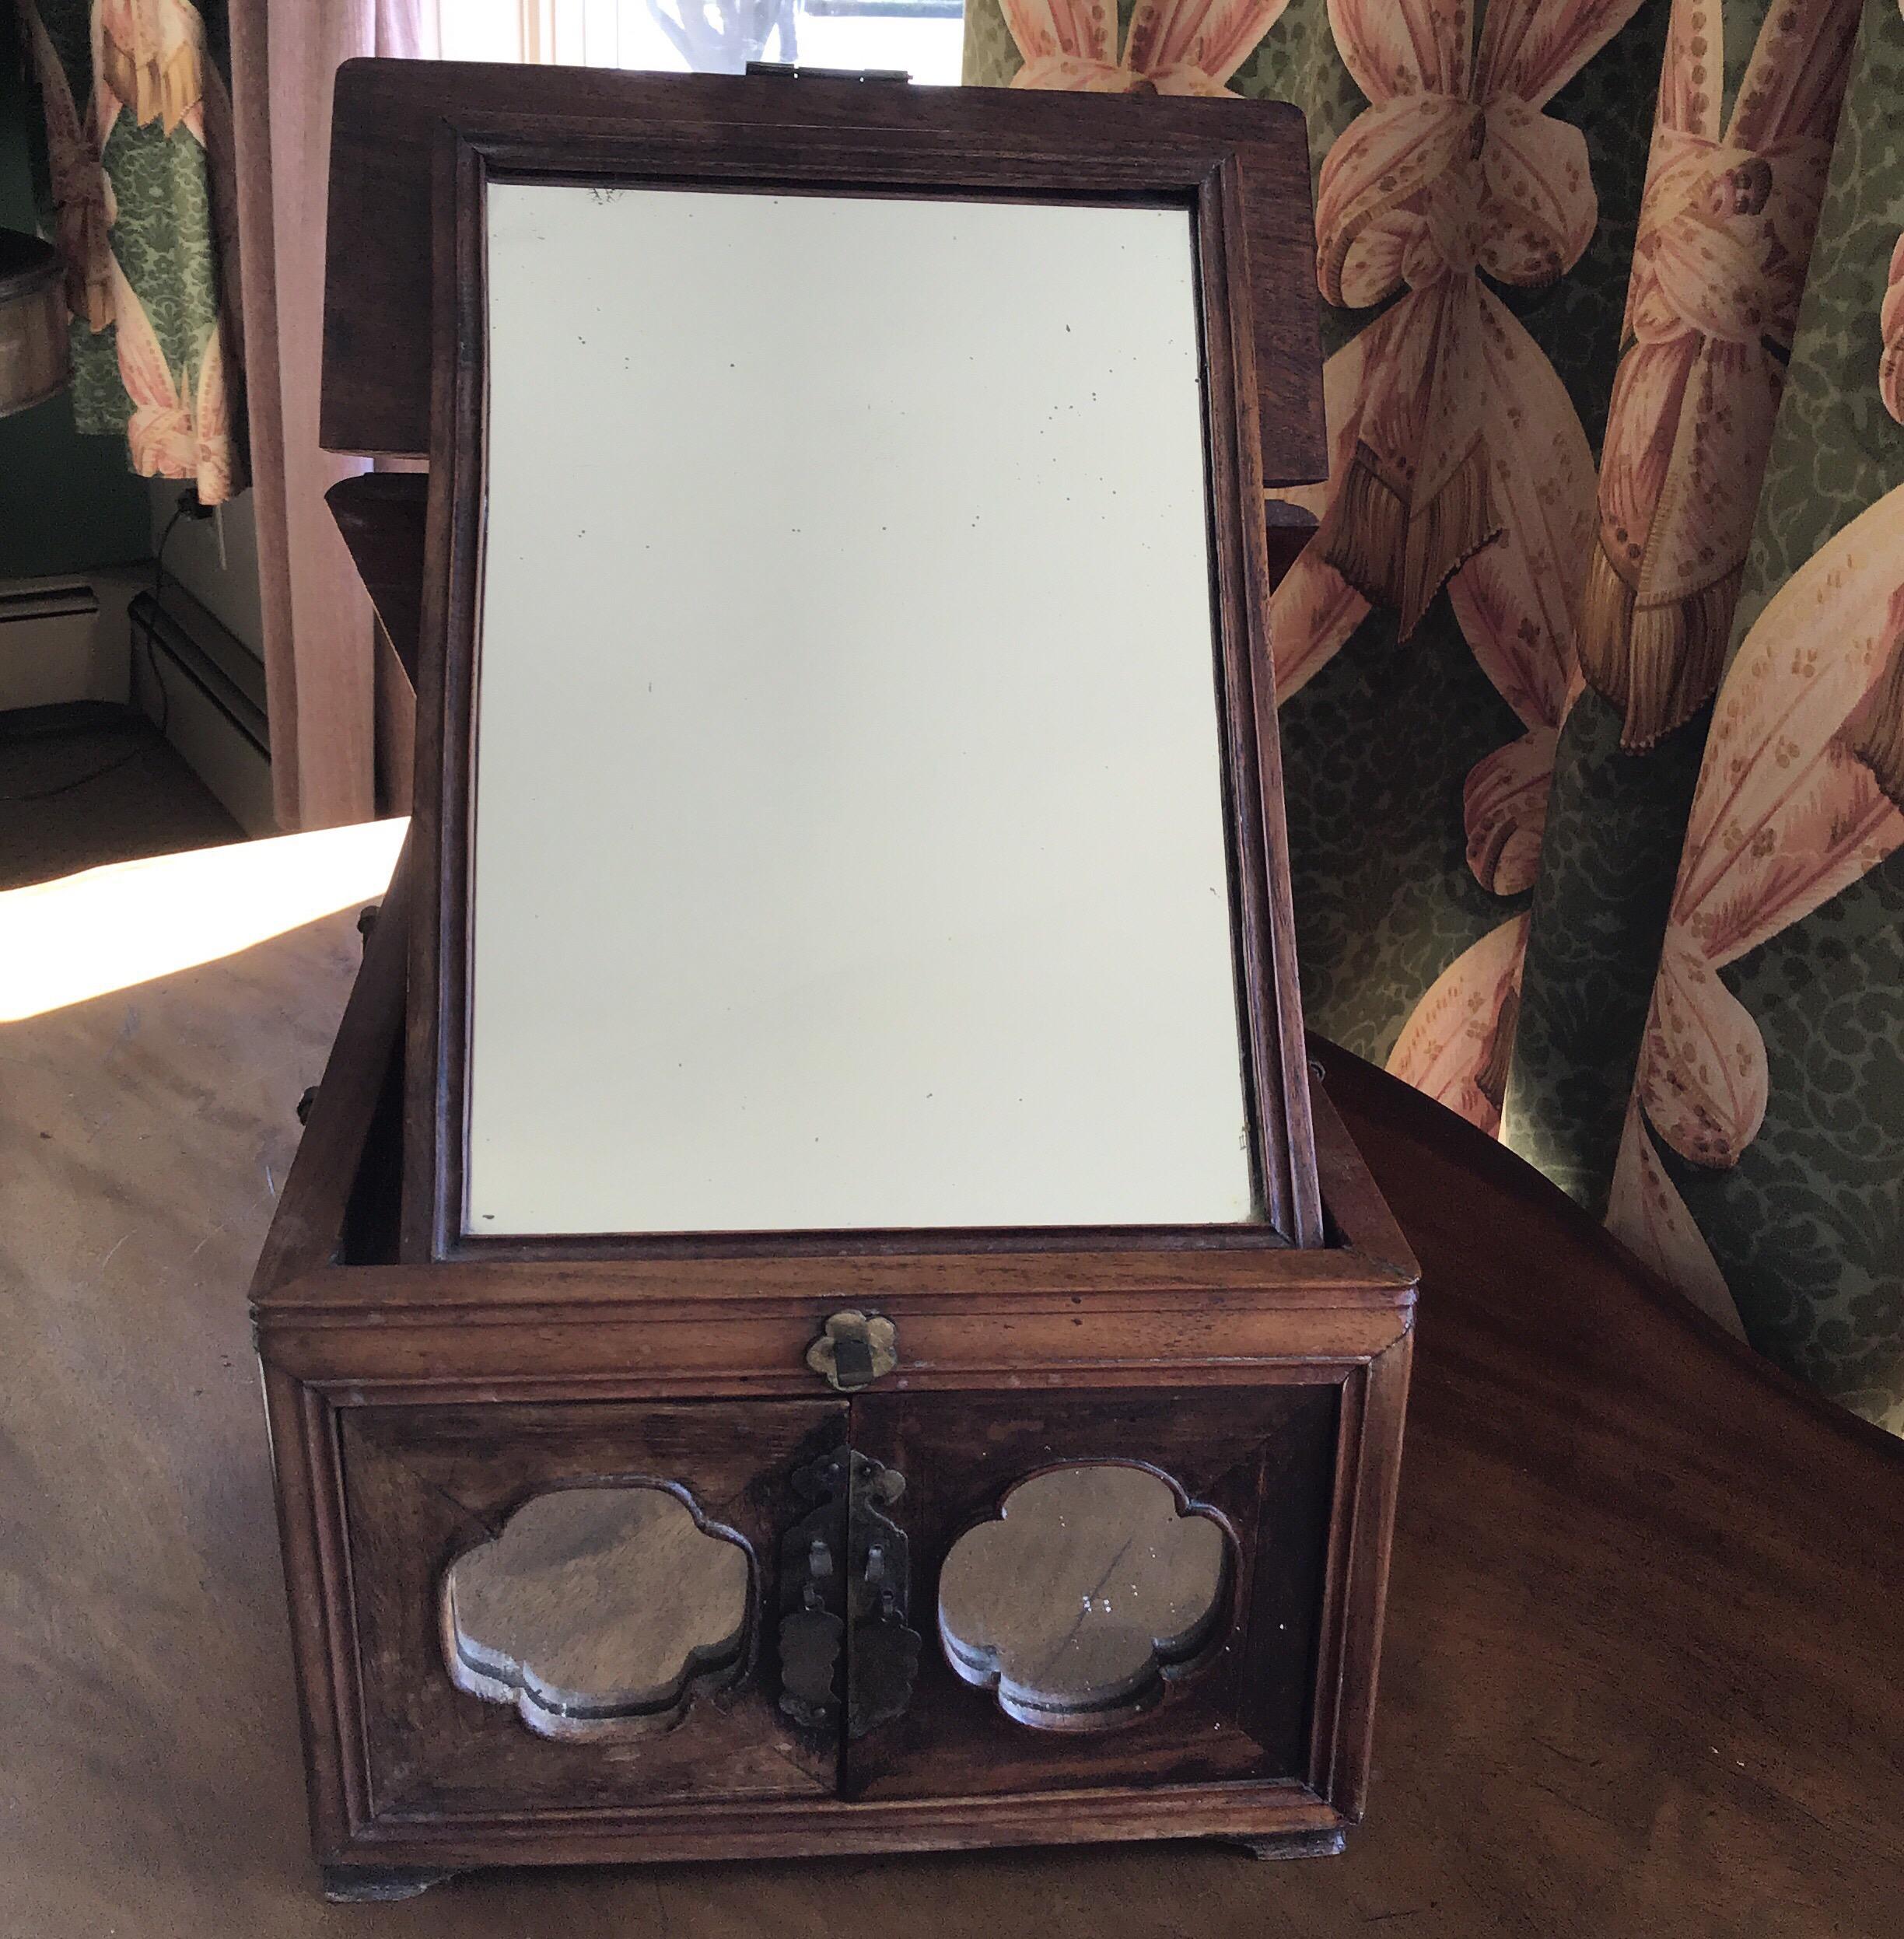 Mirrored traveling makeup /jewelry case with silvered butterfly hinges.